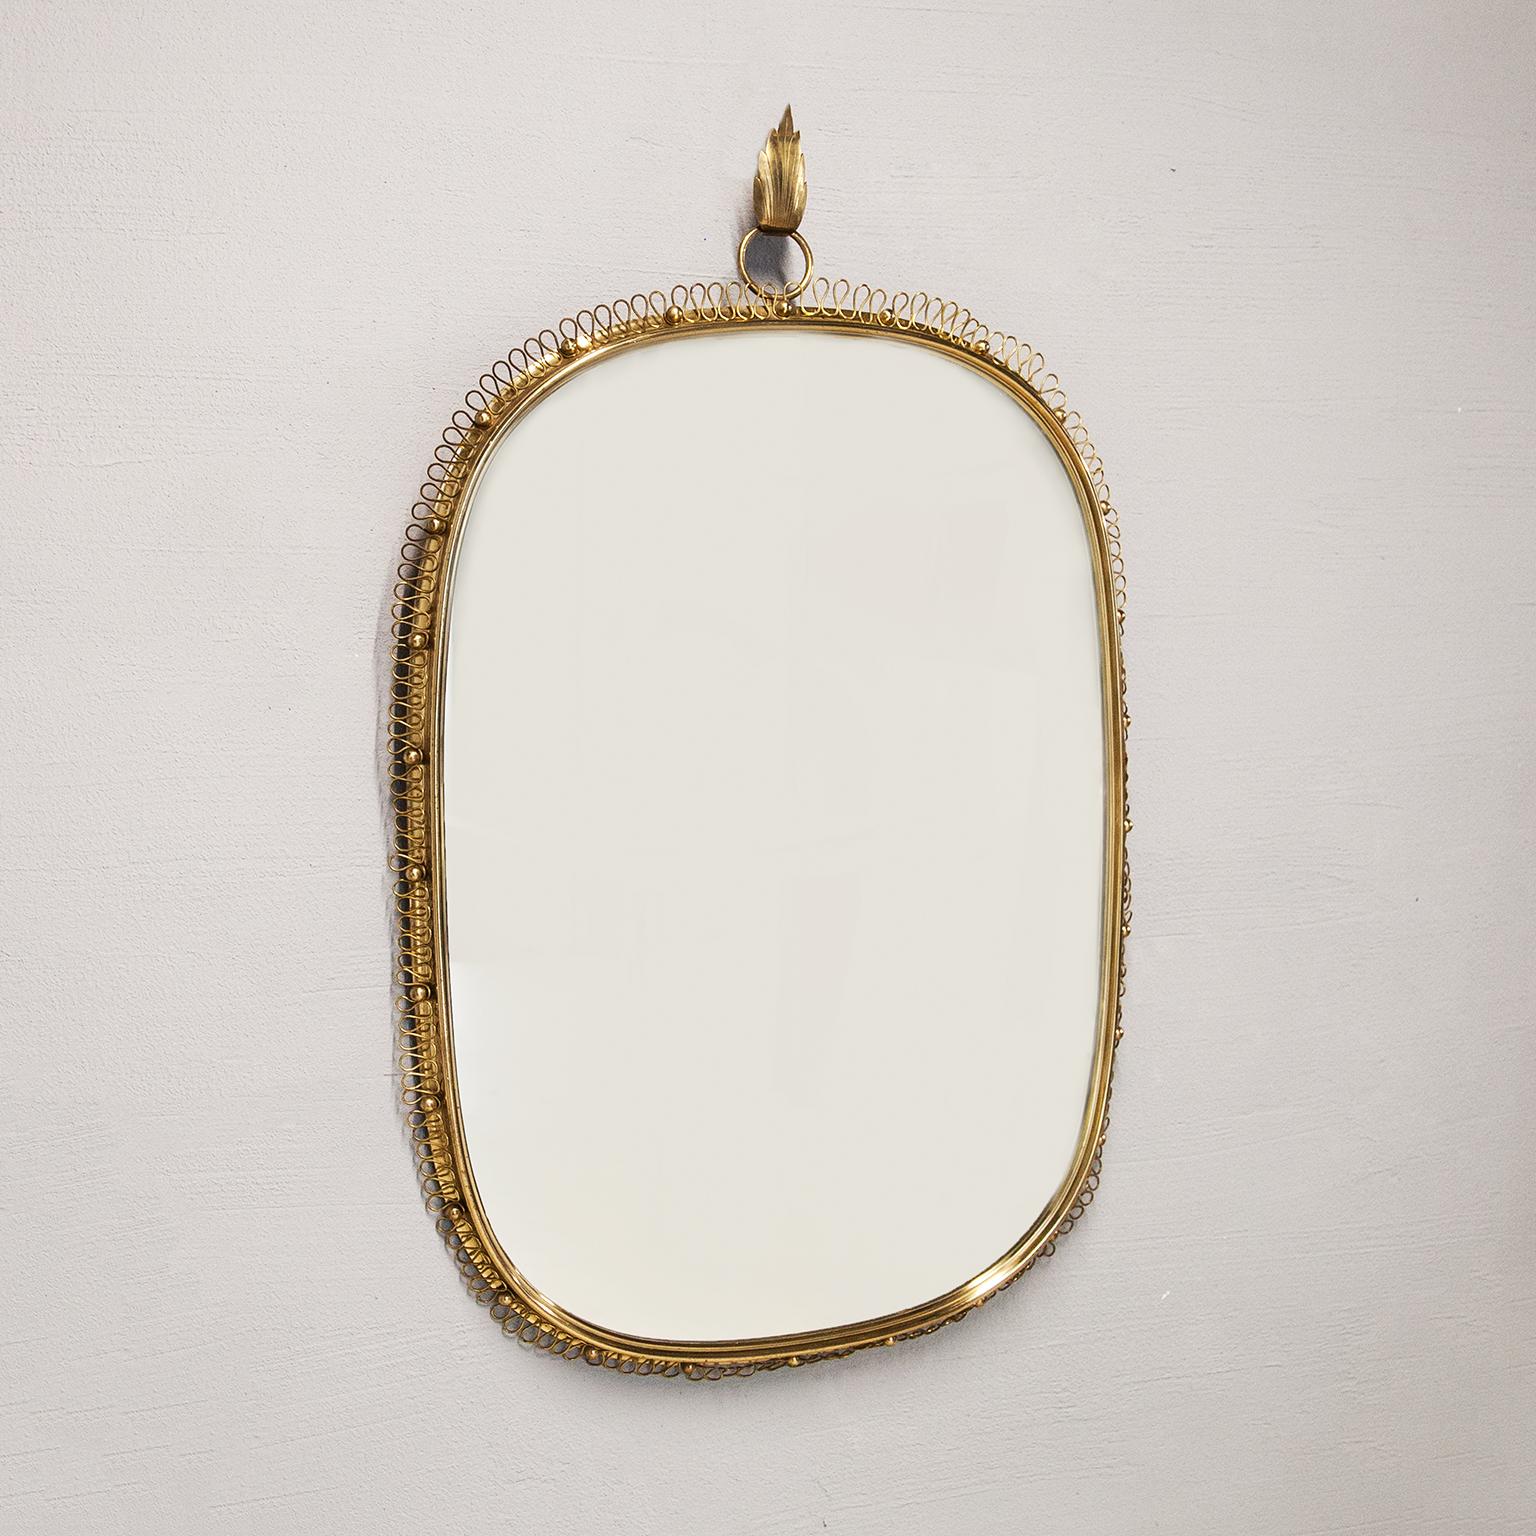 Huge wall mirror designed by Austrian Josef Frank and manufactured in Sweden by Svenskt Tenn in the 1960s.
The mirror is made of full shiny brass frame with spiral loop frame around and big round hanging hook on top. You can easily recognize his